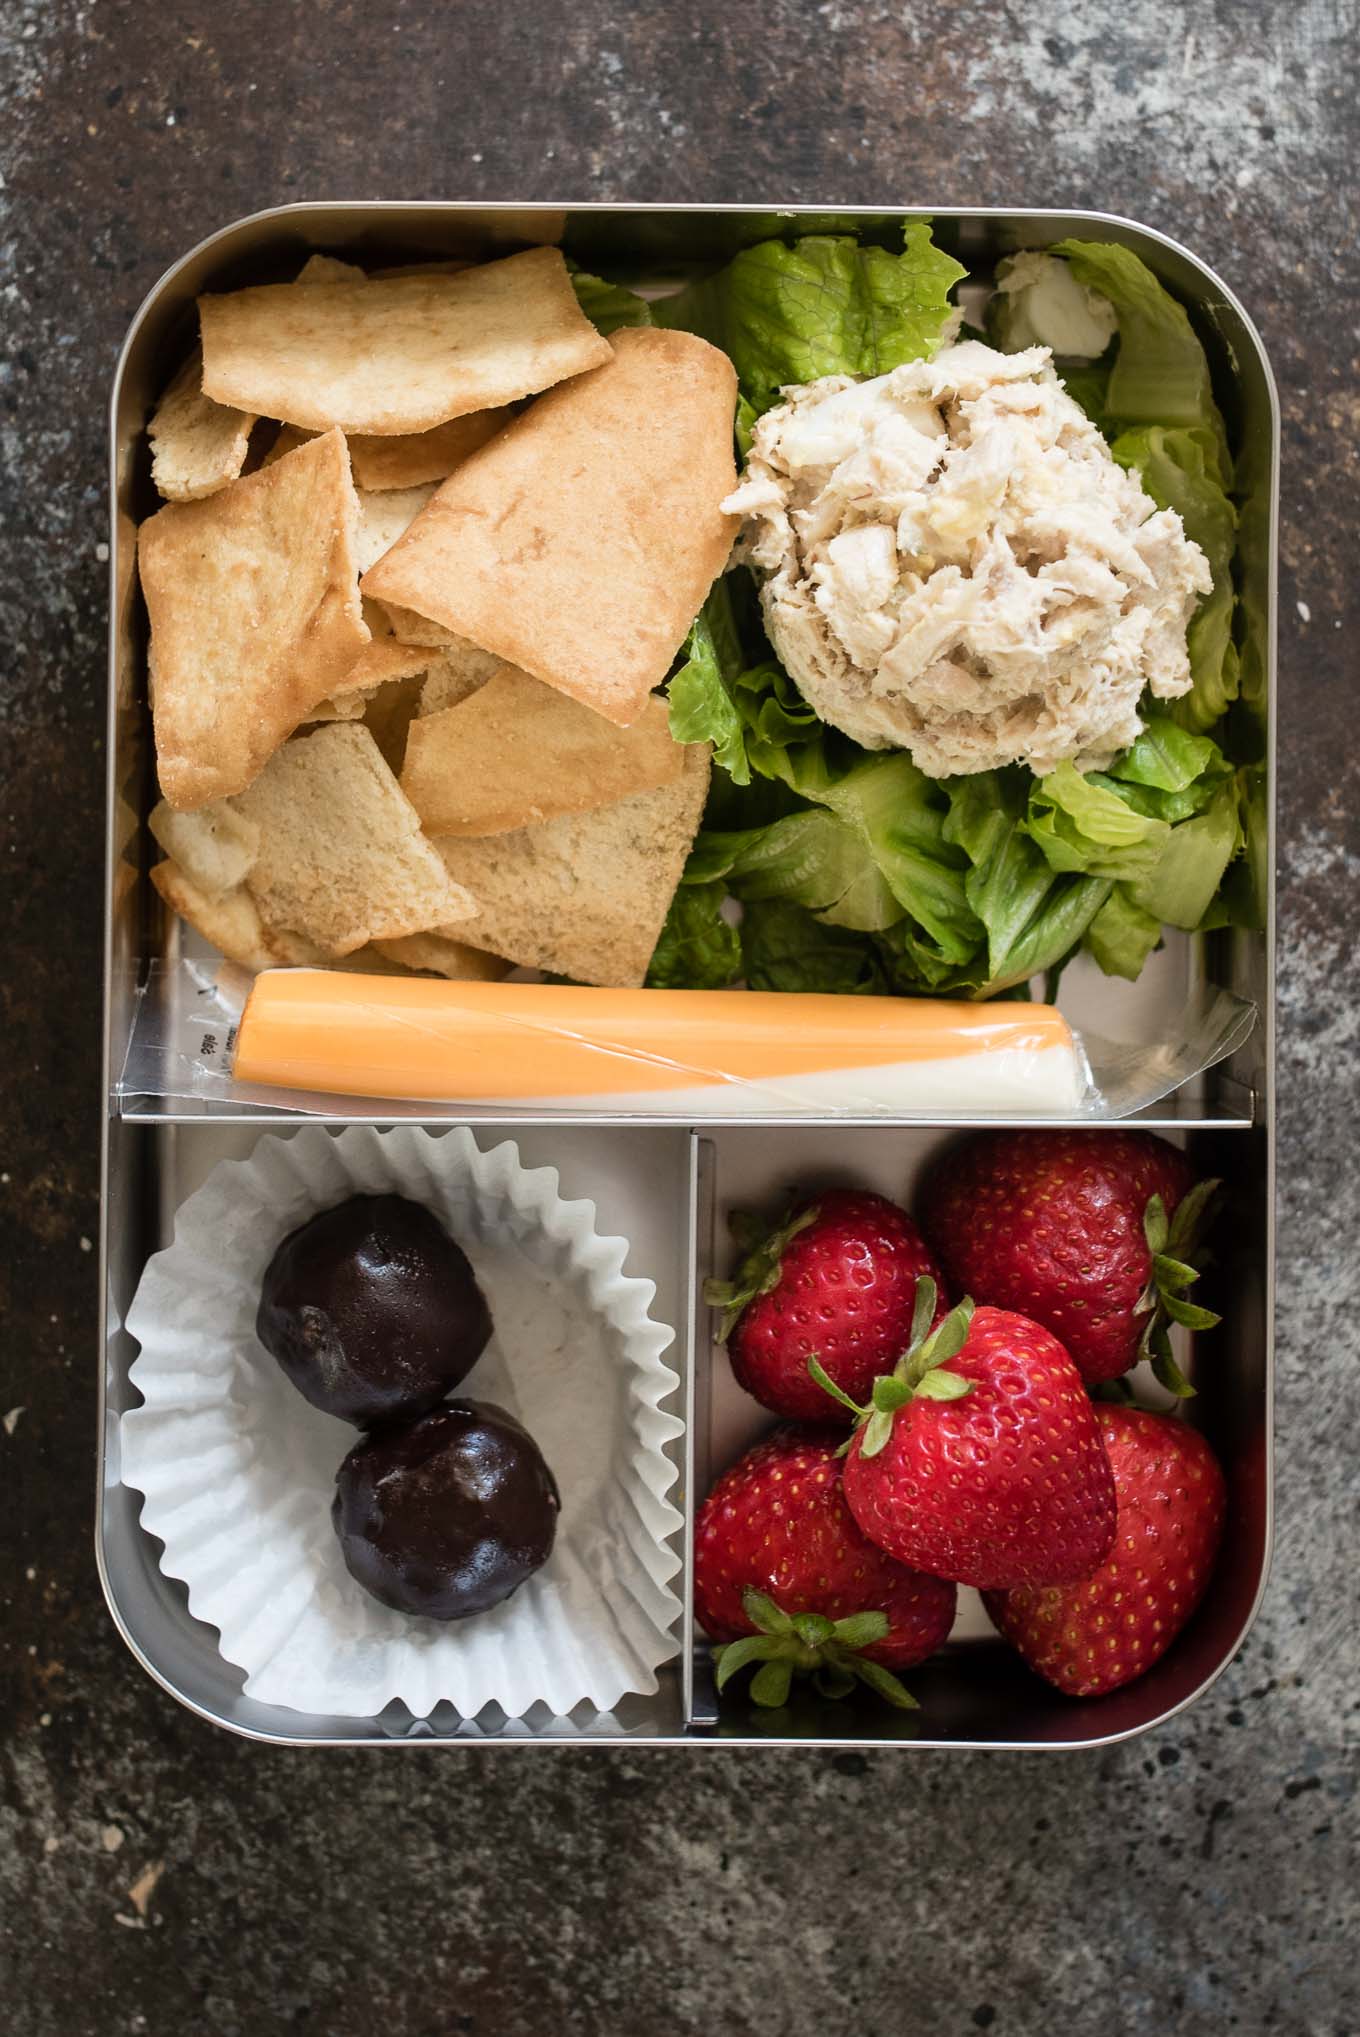 http://www.nutritiouseats.com/wp-content/uploads/2017/08/Healthy-Lunch-Boxes-9.jpg